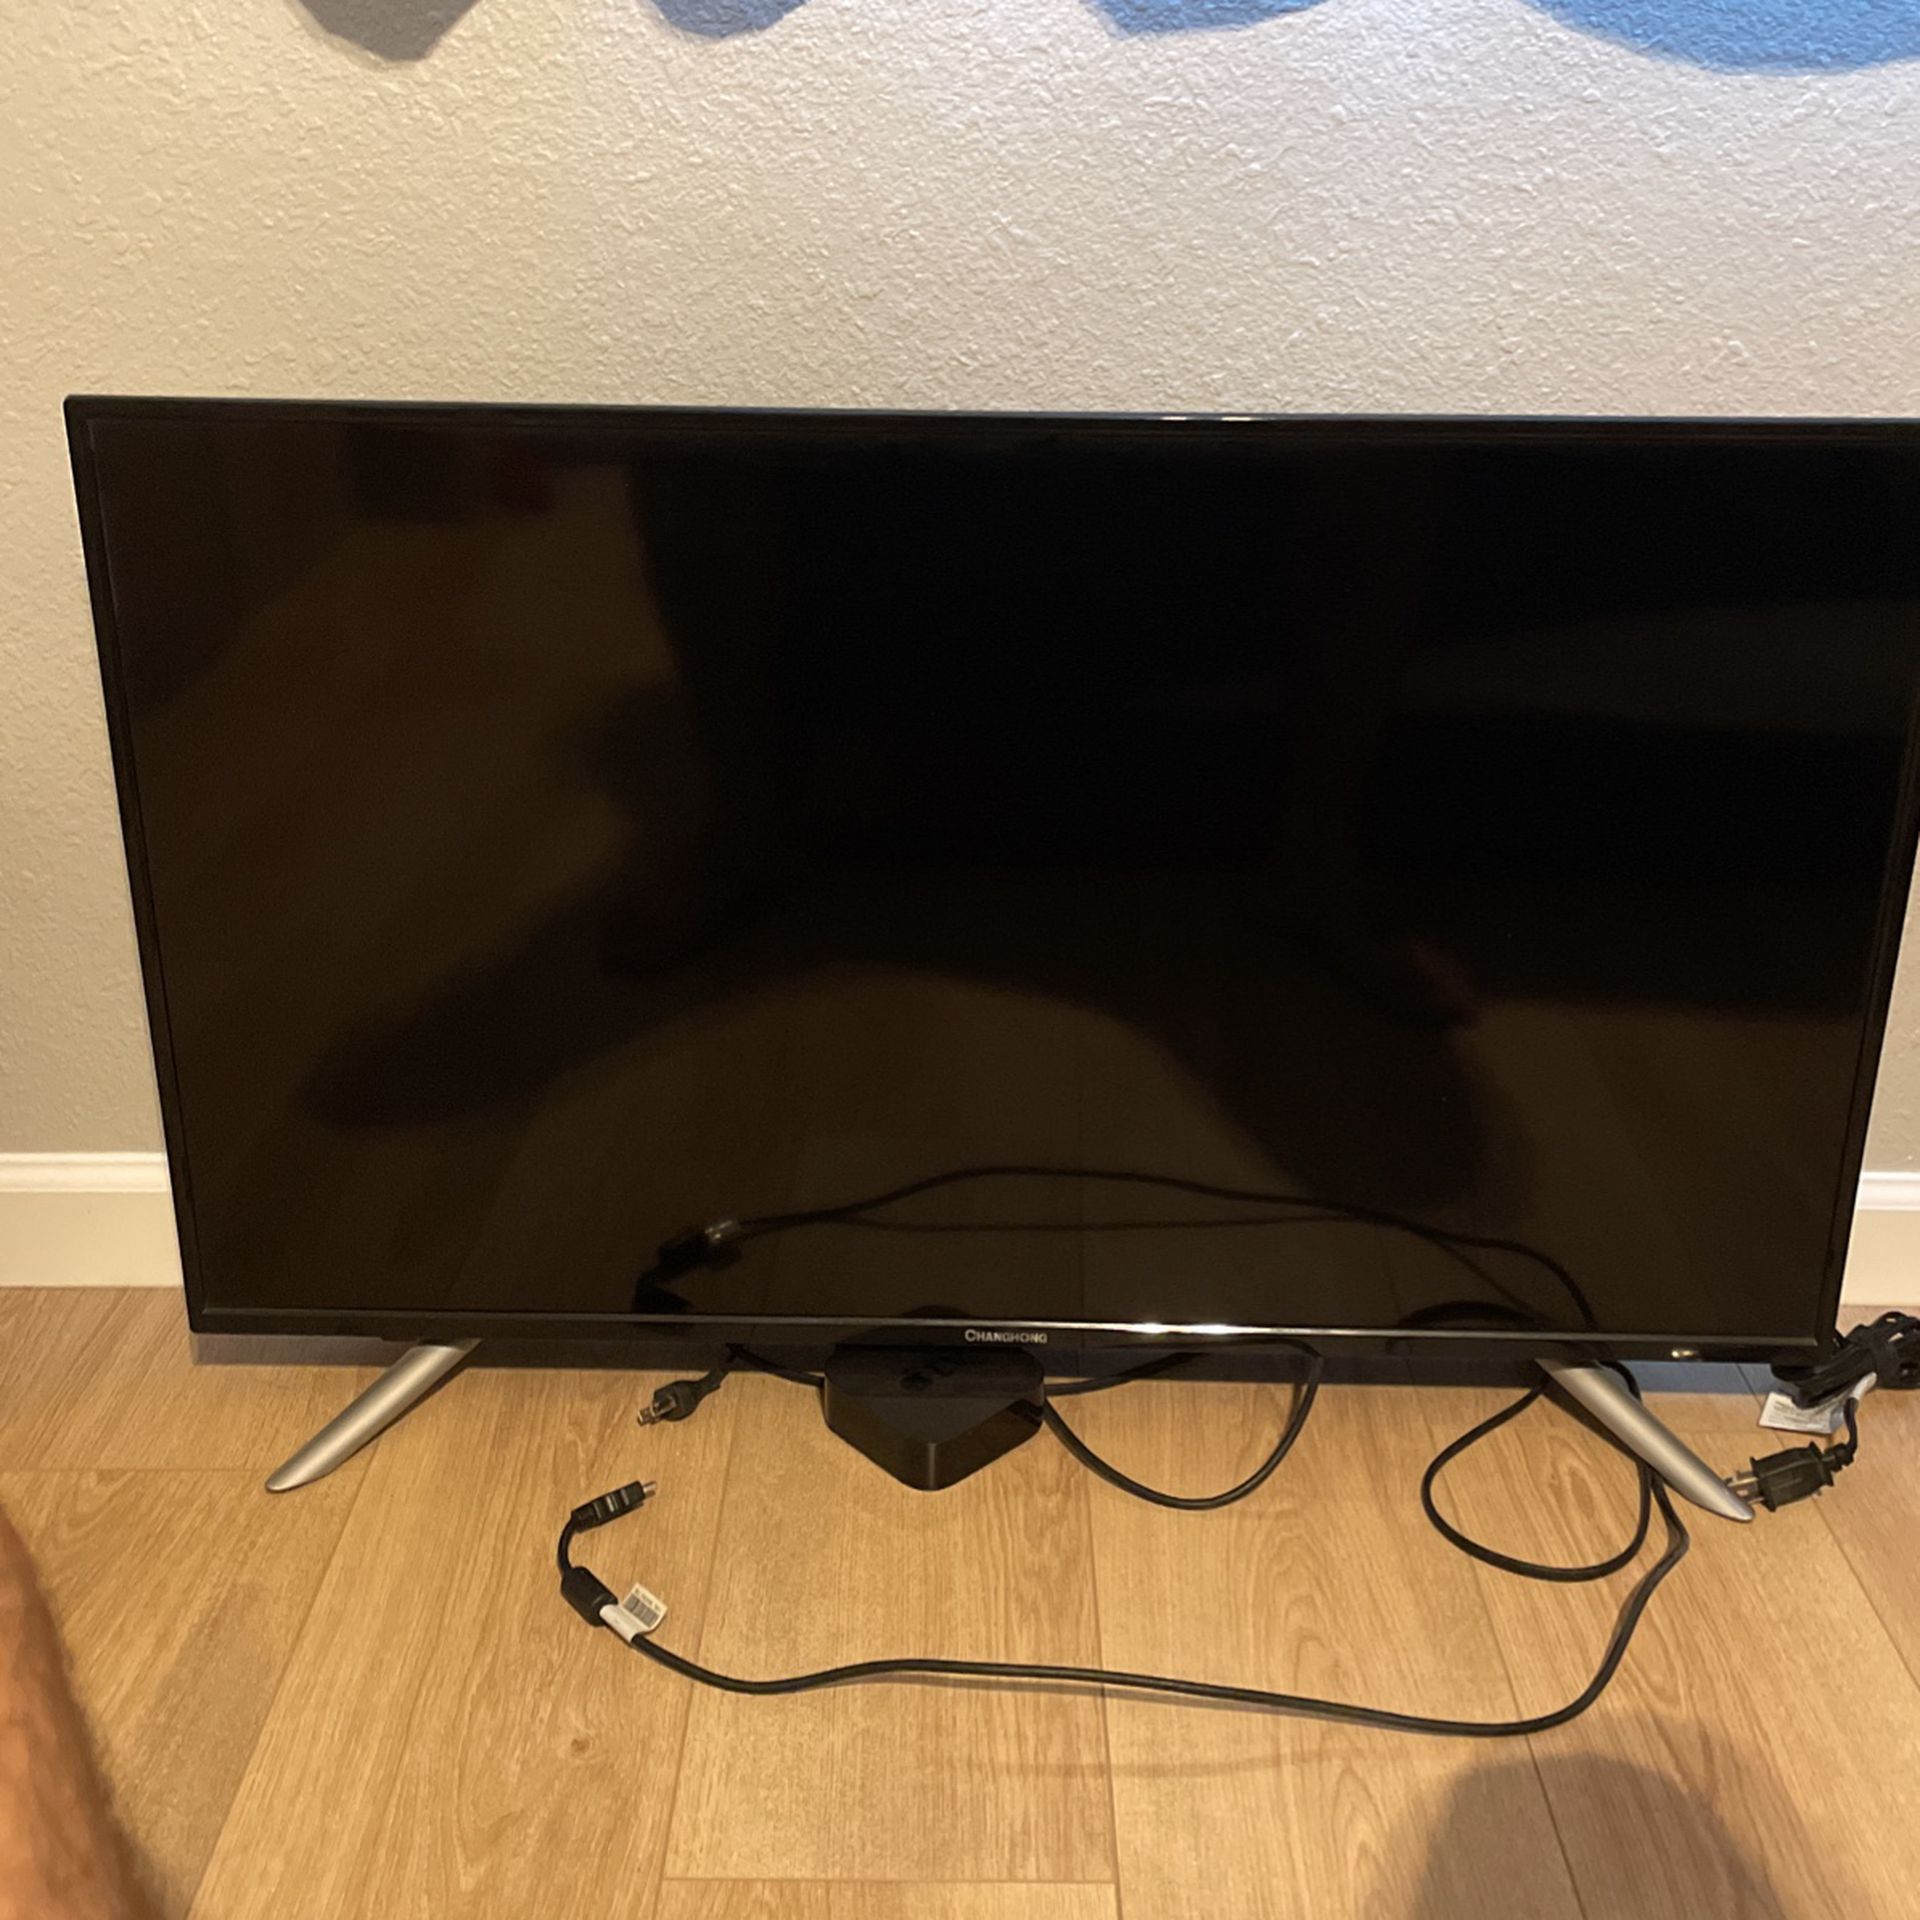 40” TV With Apple TV Box Included